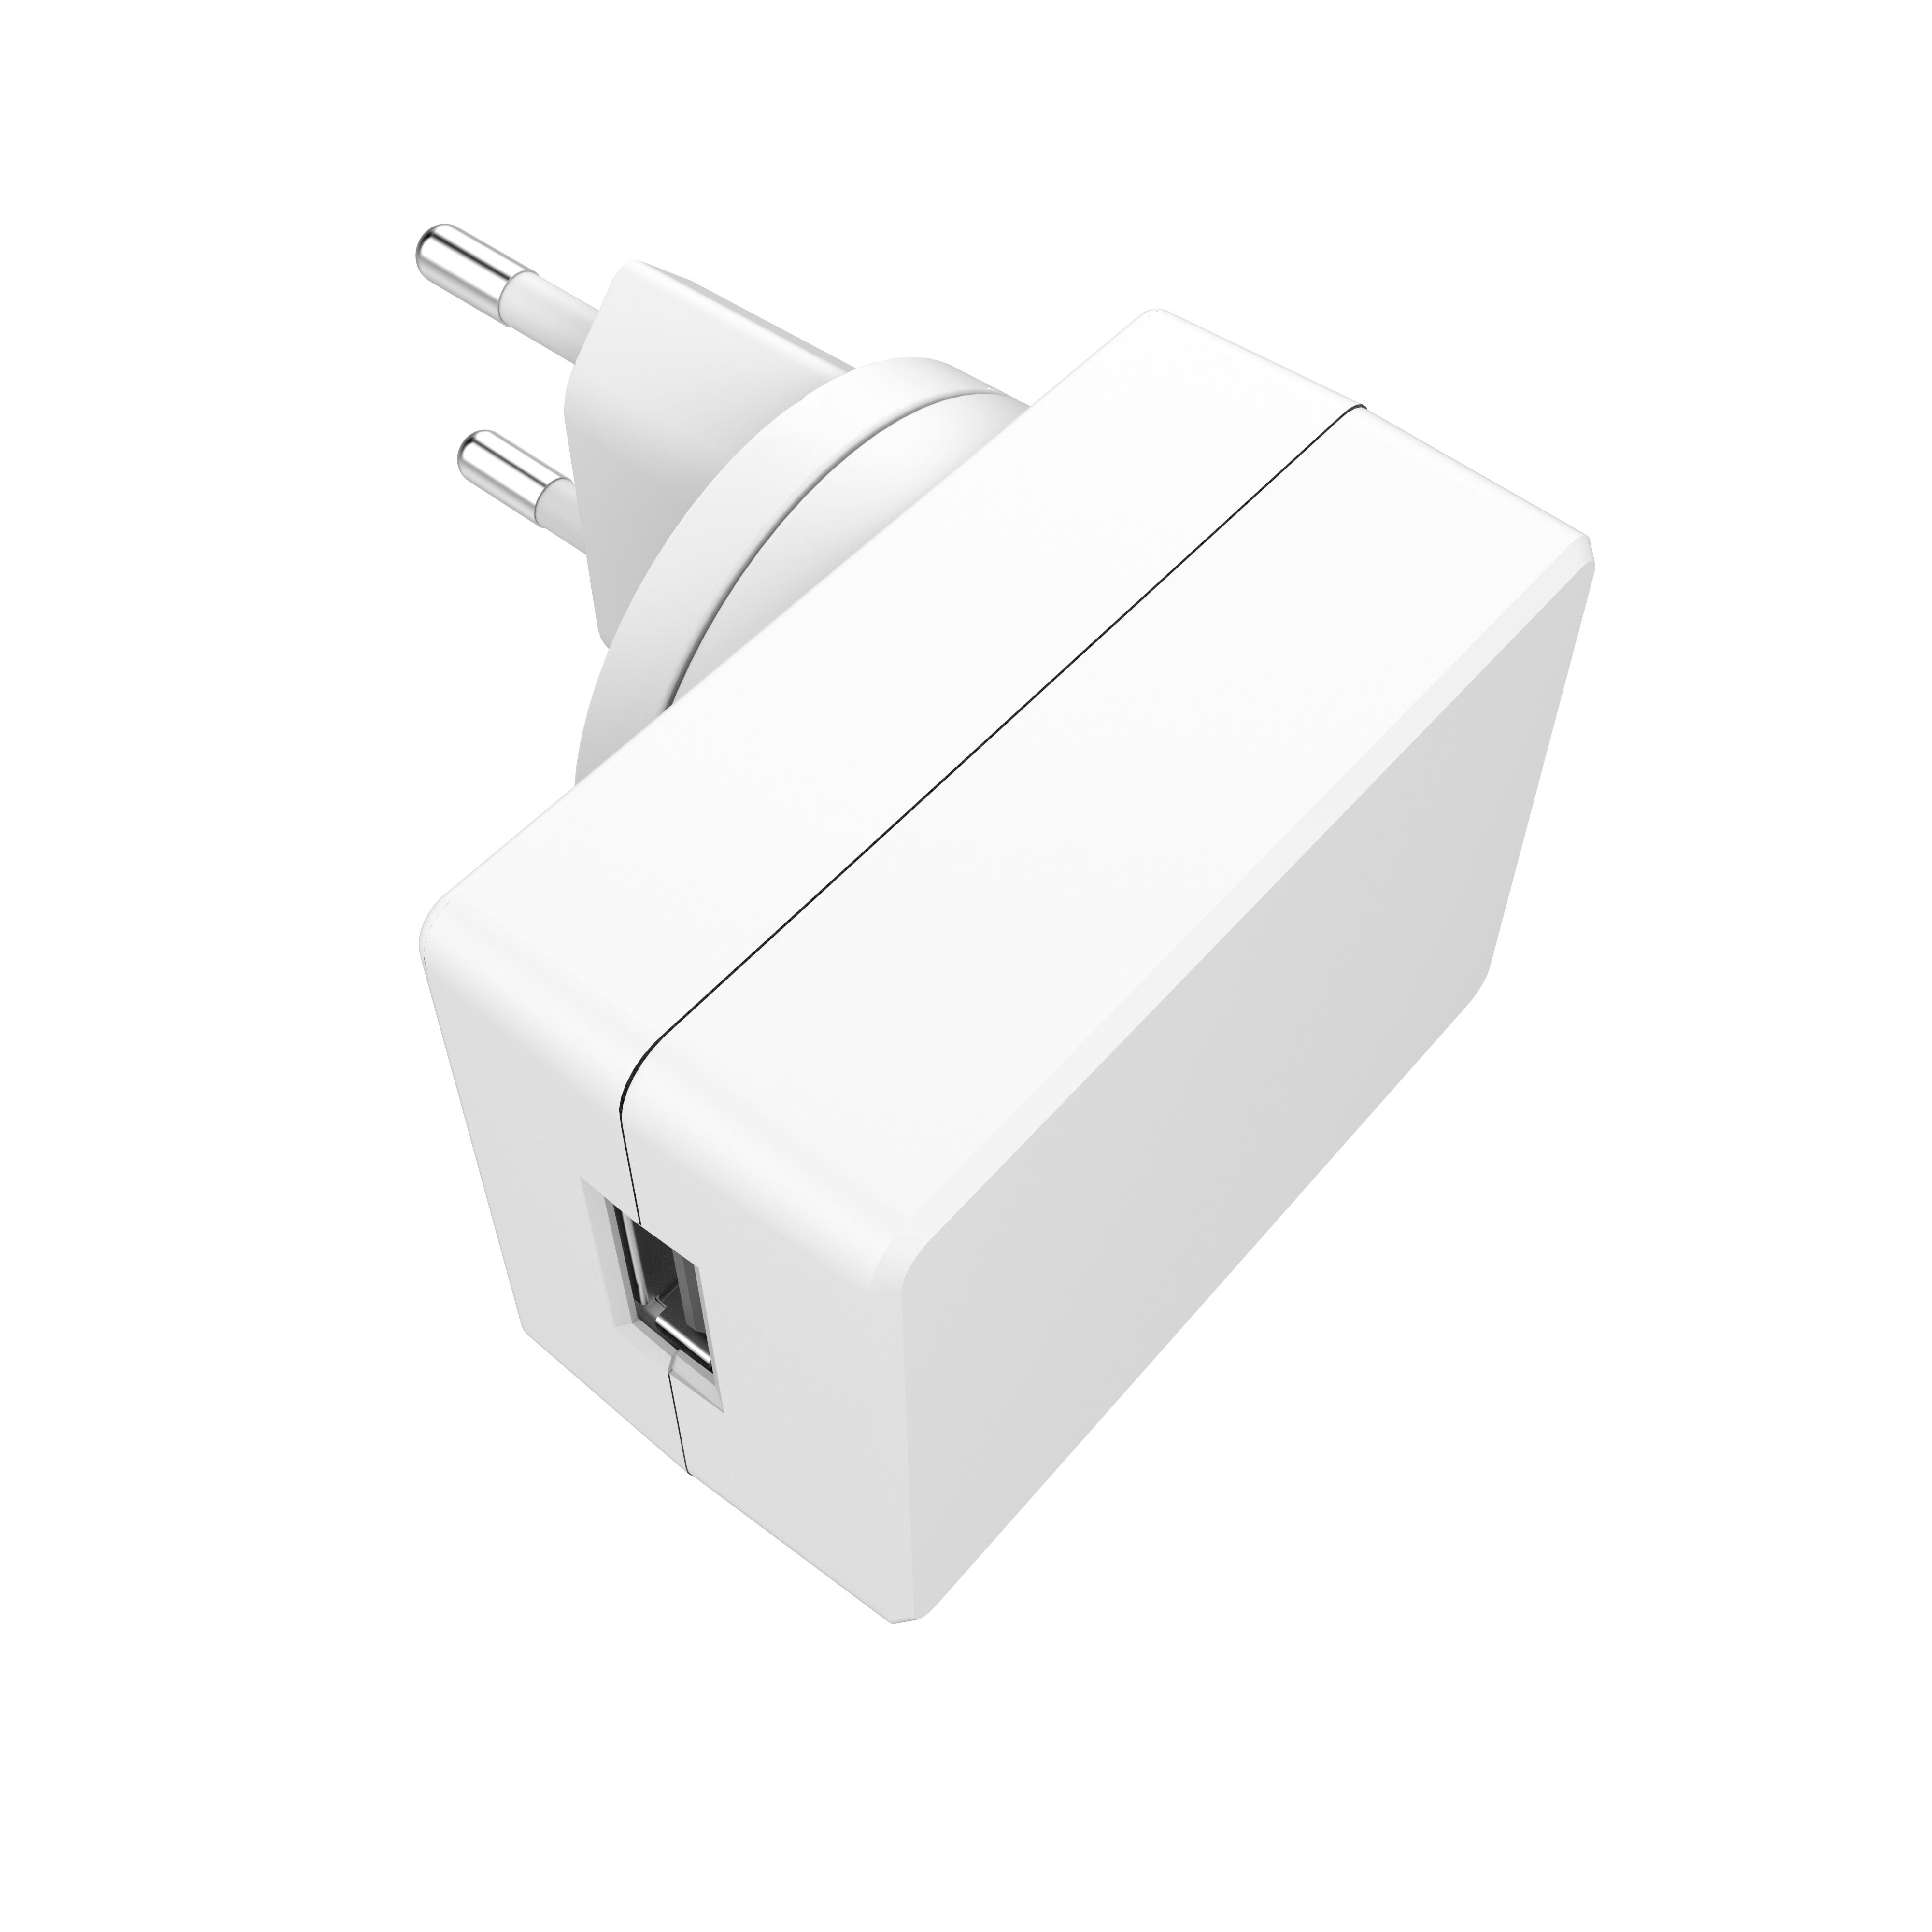 15W max 5V 3A USB Power adapter 5V 2.5A removable type with UL/CE/GS/UKCA/SAA certs for robot